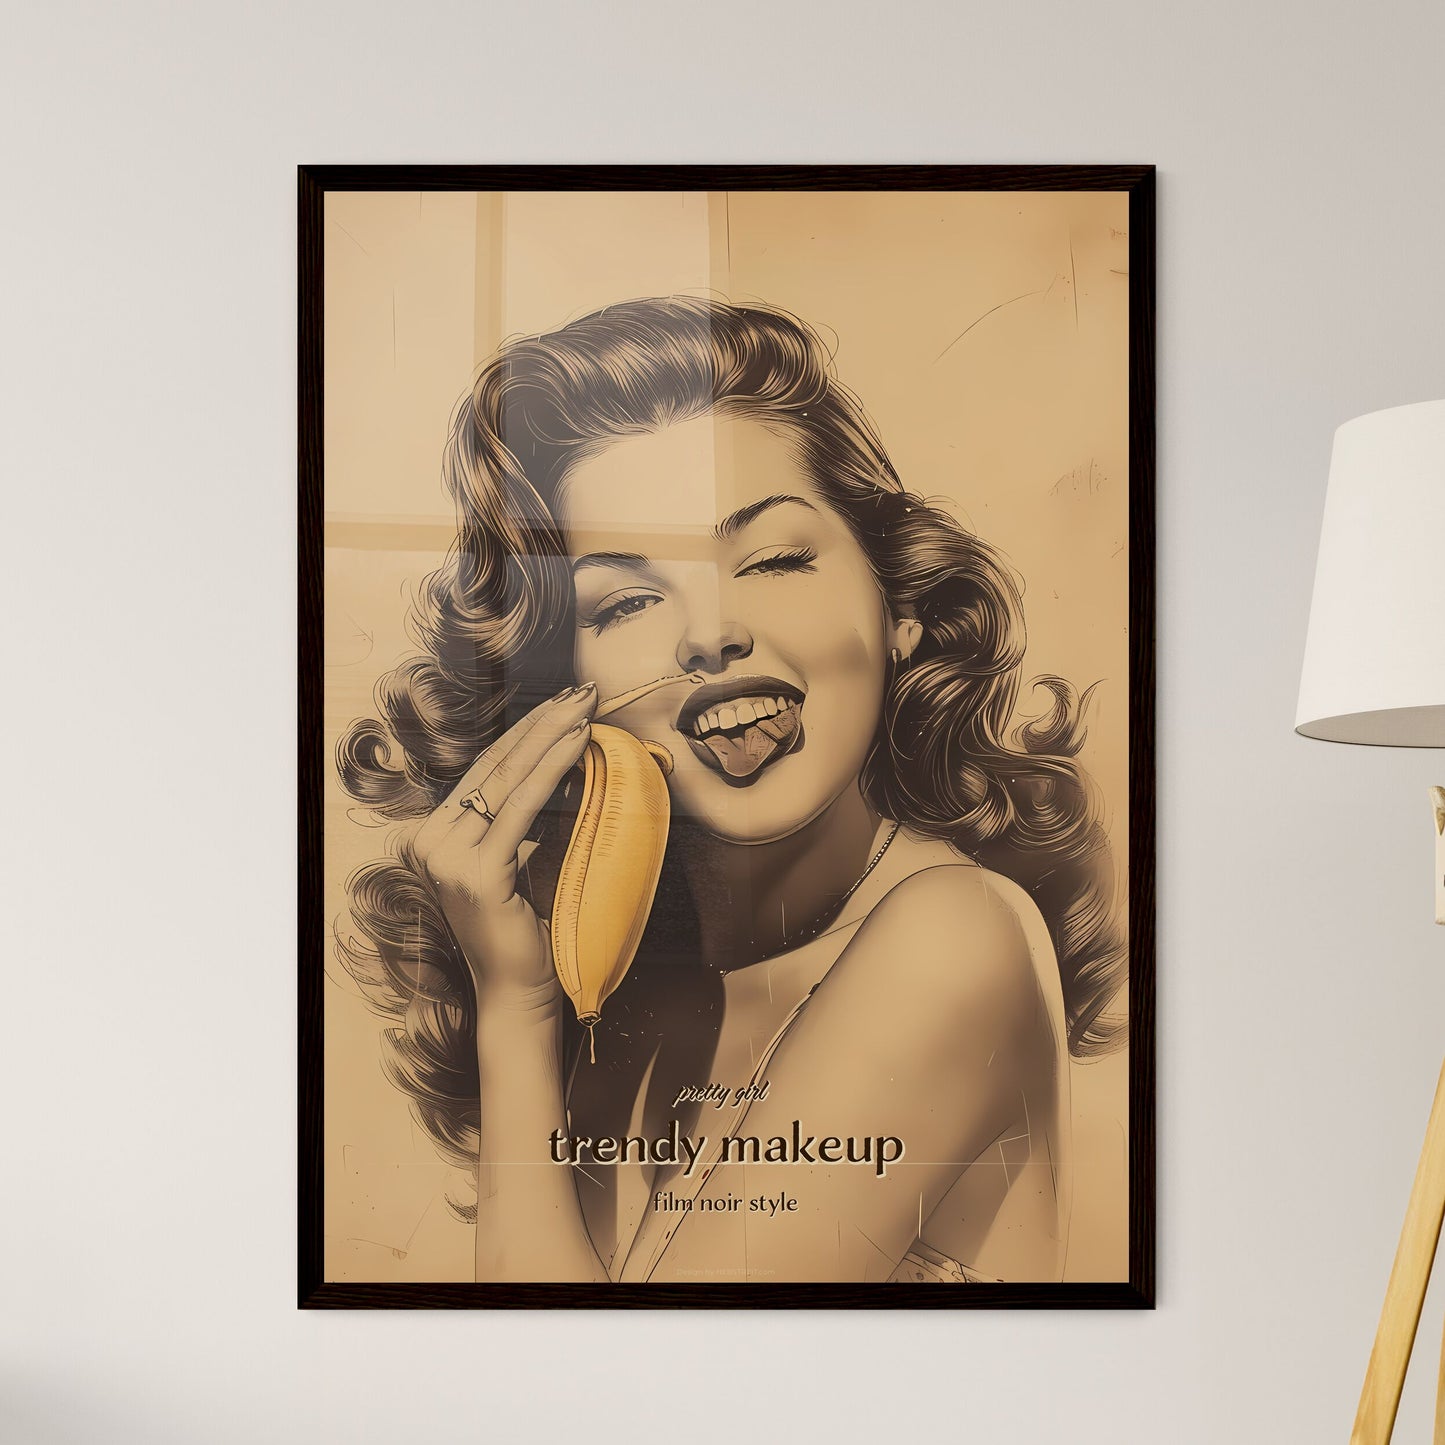 pretty girl, trendy makeup, film noir style, A Poster of a woman holding a banana Default Title